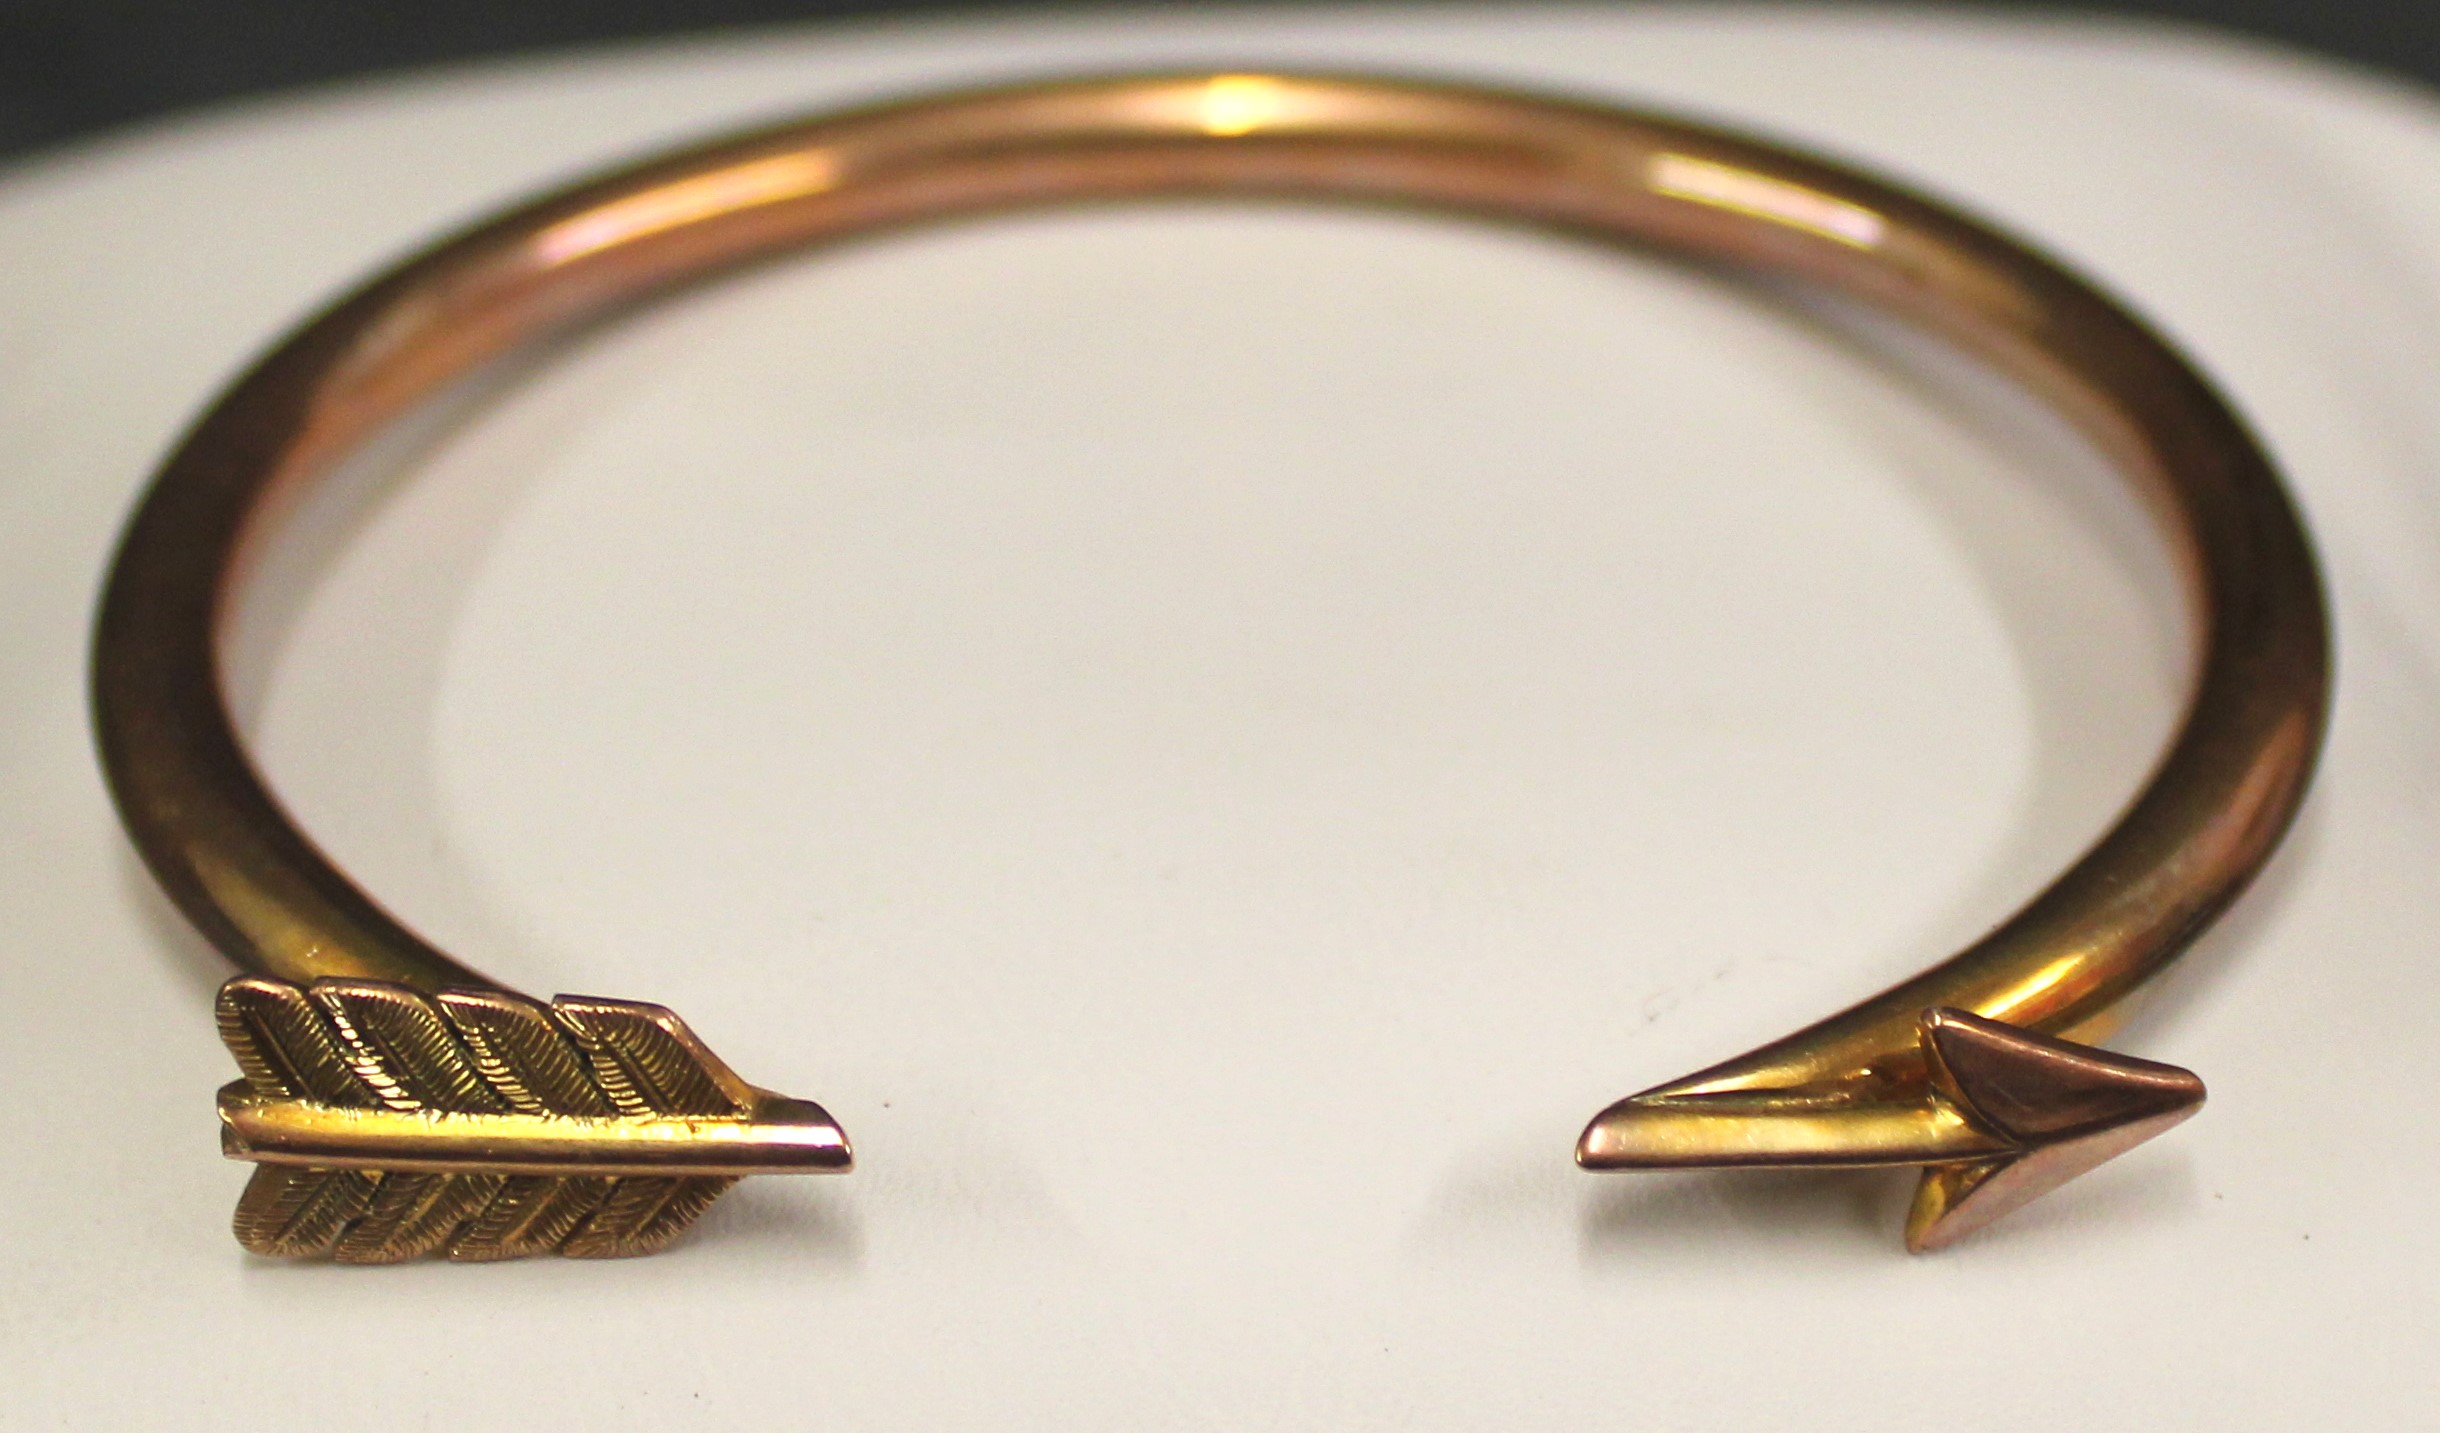 1925 9ct Rose Gold Torque Bangle with arrow decoration on ends. Rd number 714188. 12.7 grams.